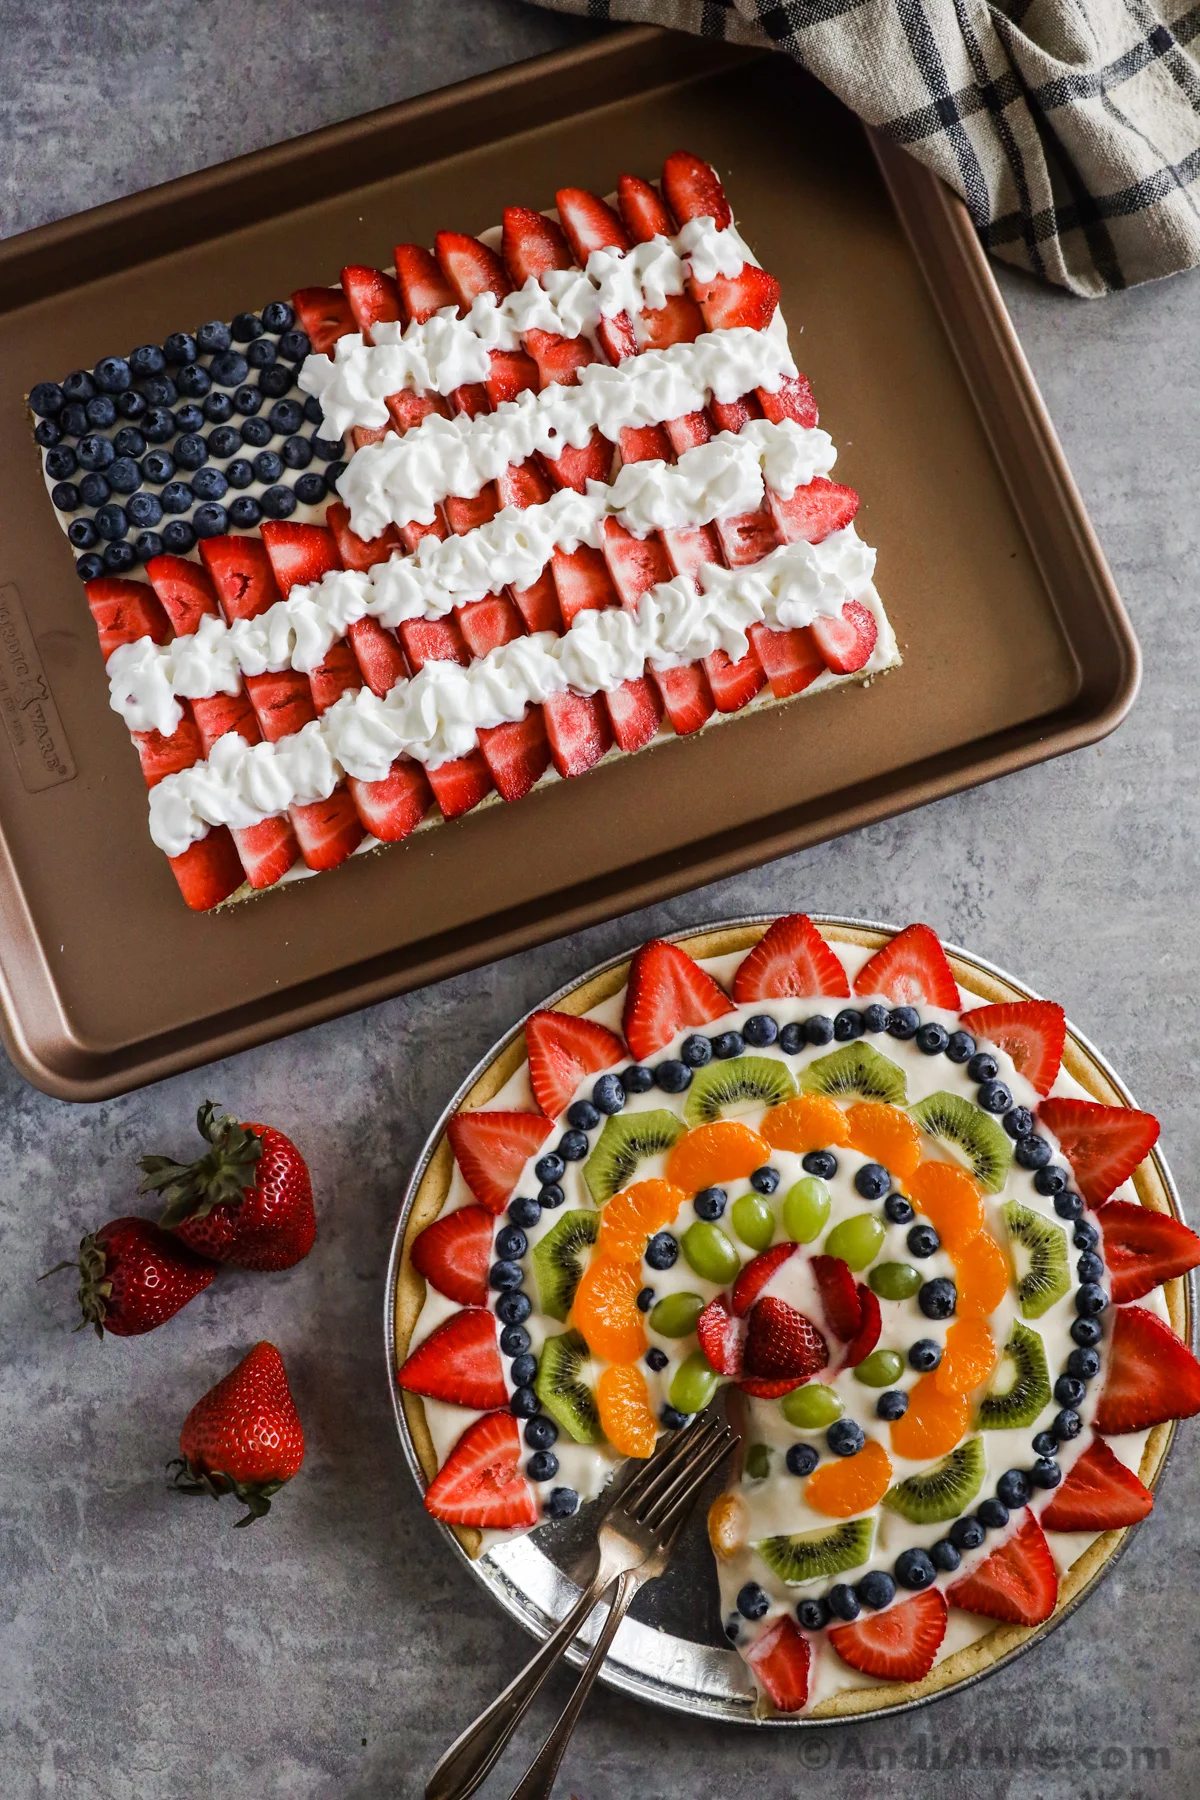 An american flag fruit pizza and a round sugar cookie fruit pizza with various colorful sliced fruit to create a circular design.